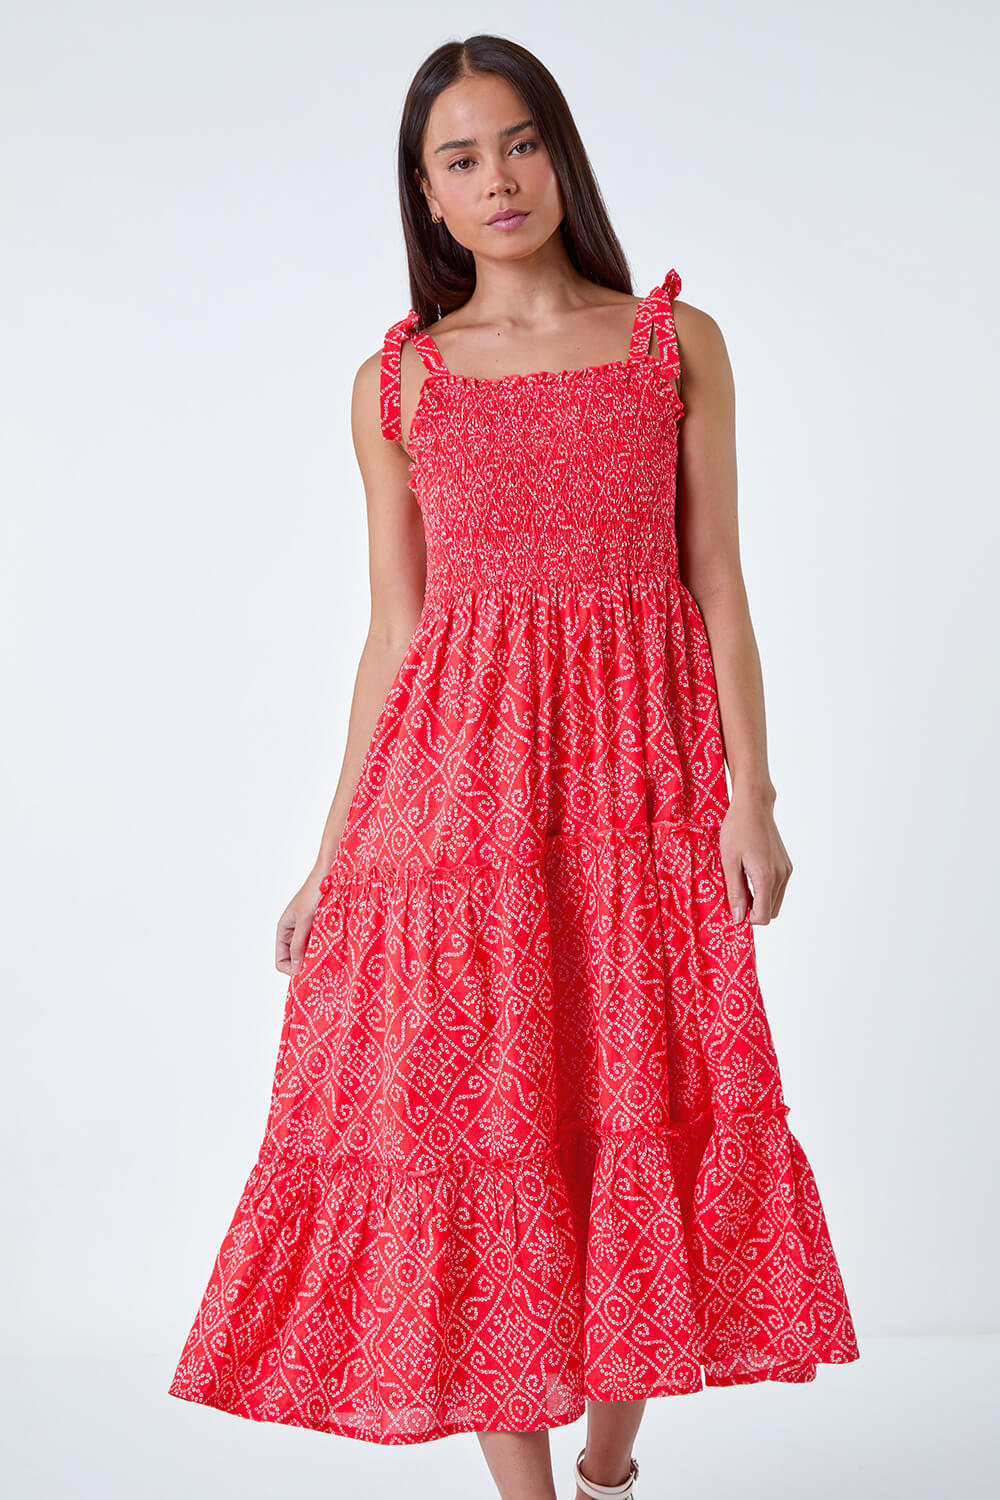 CORAL Petite Cotton Ditsy Print Shirred Maxi Dress, Image 4 of 5